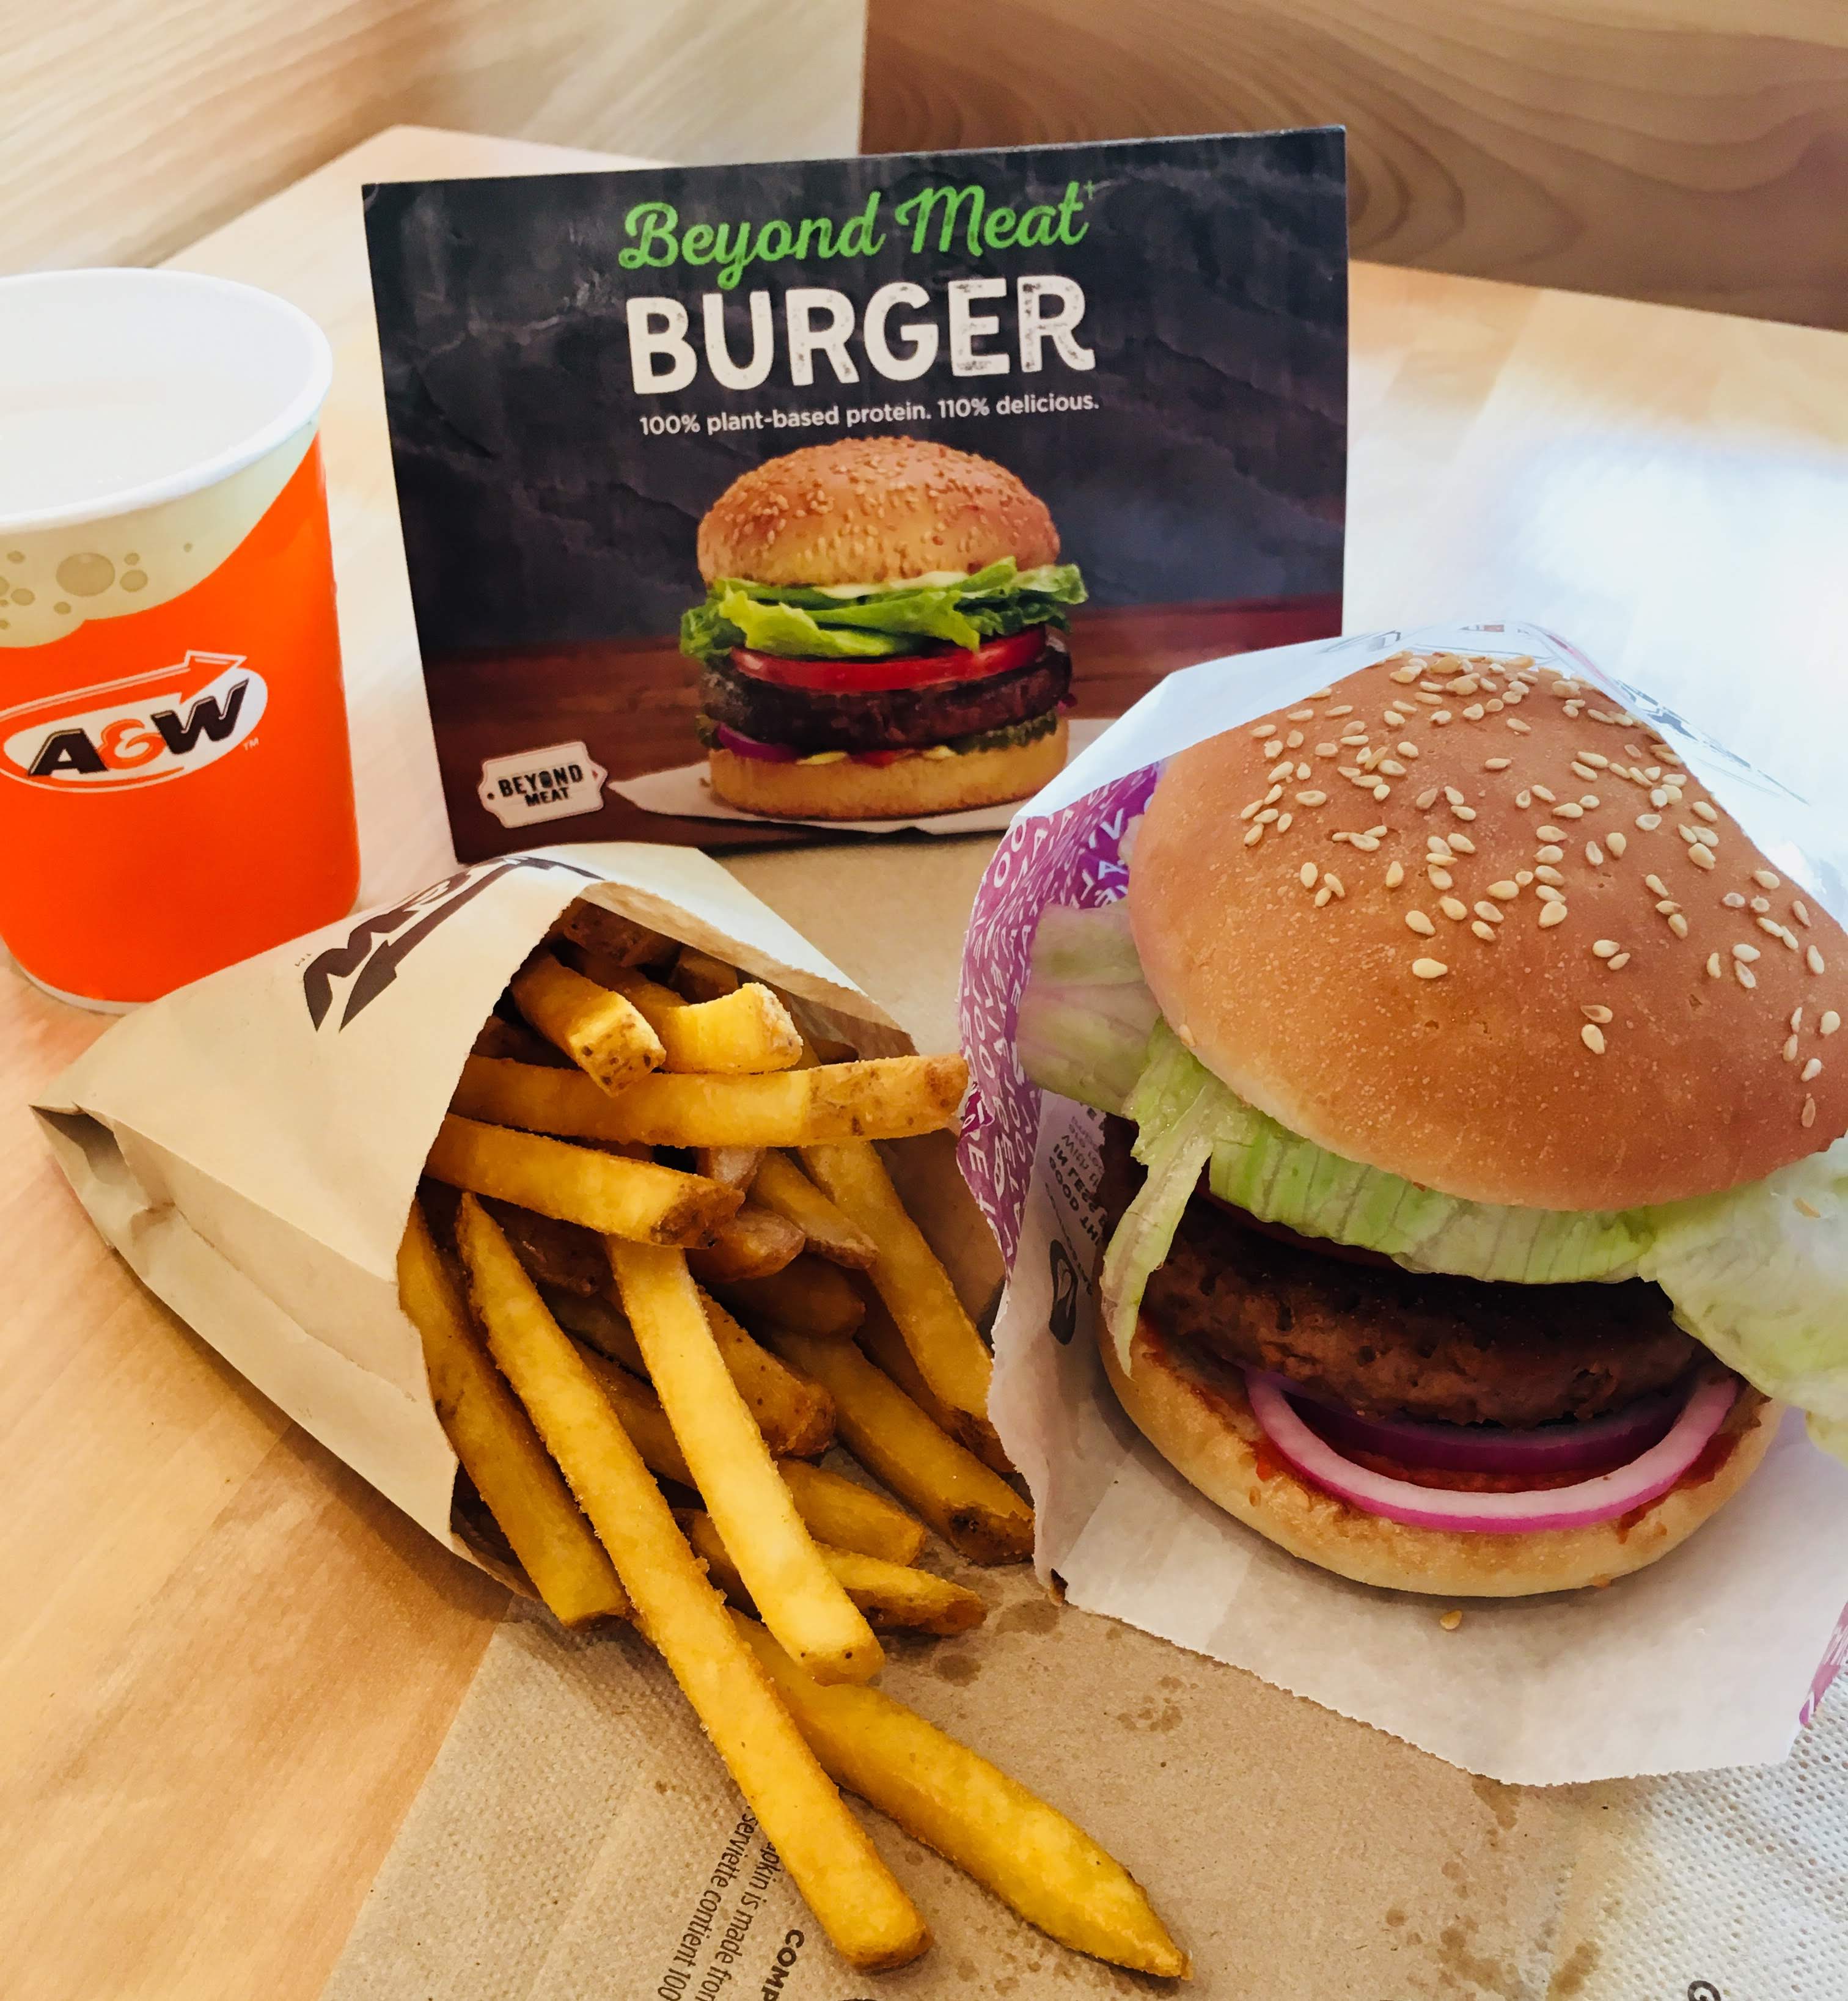 A and W burger